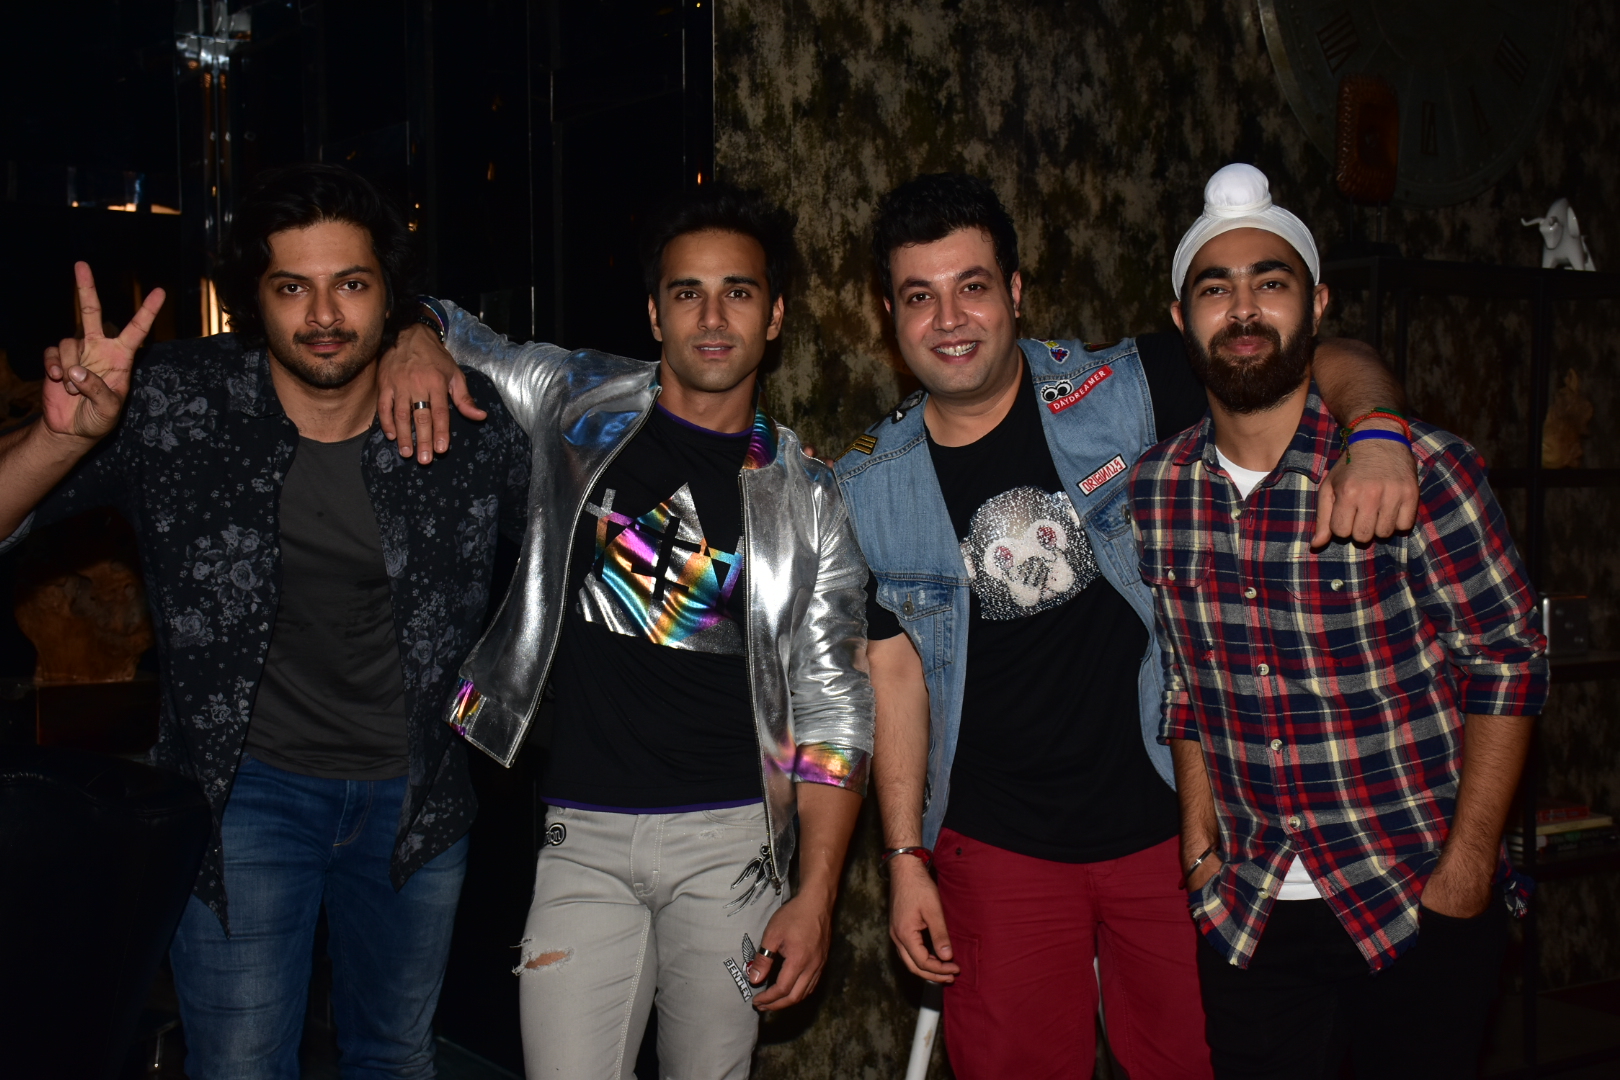 Team Fukrey Returns shoot for a promotional song in Mumbai